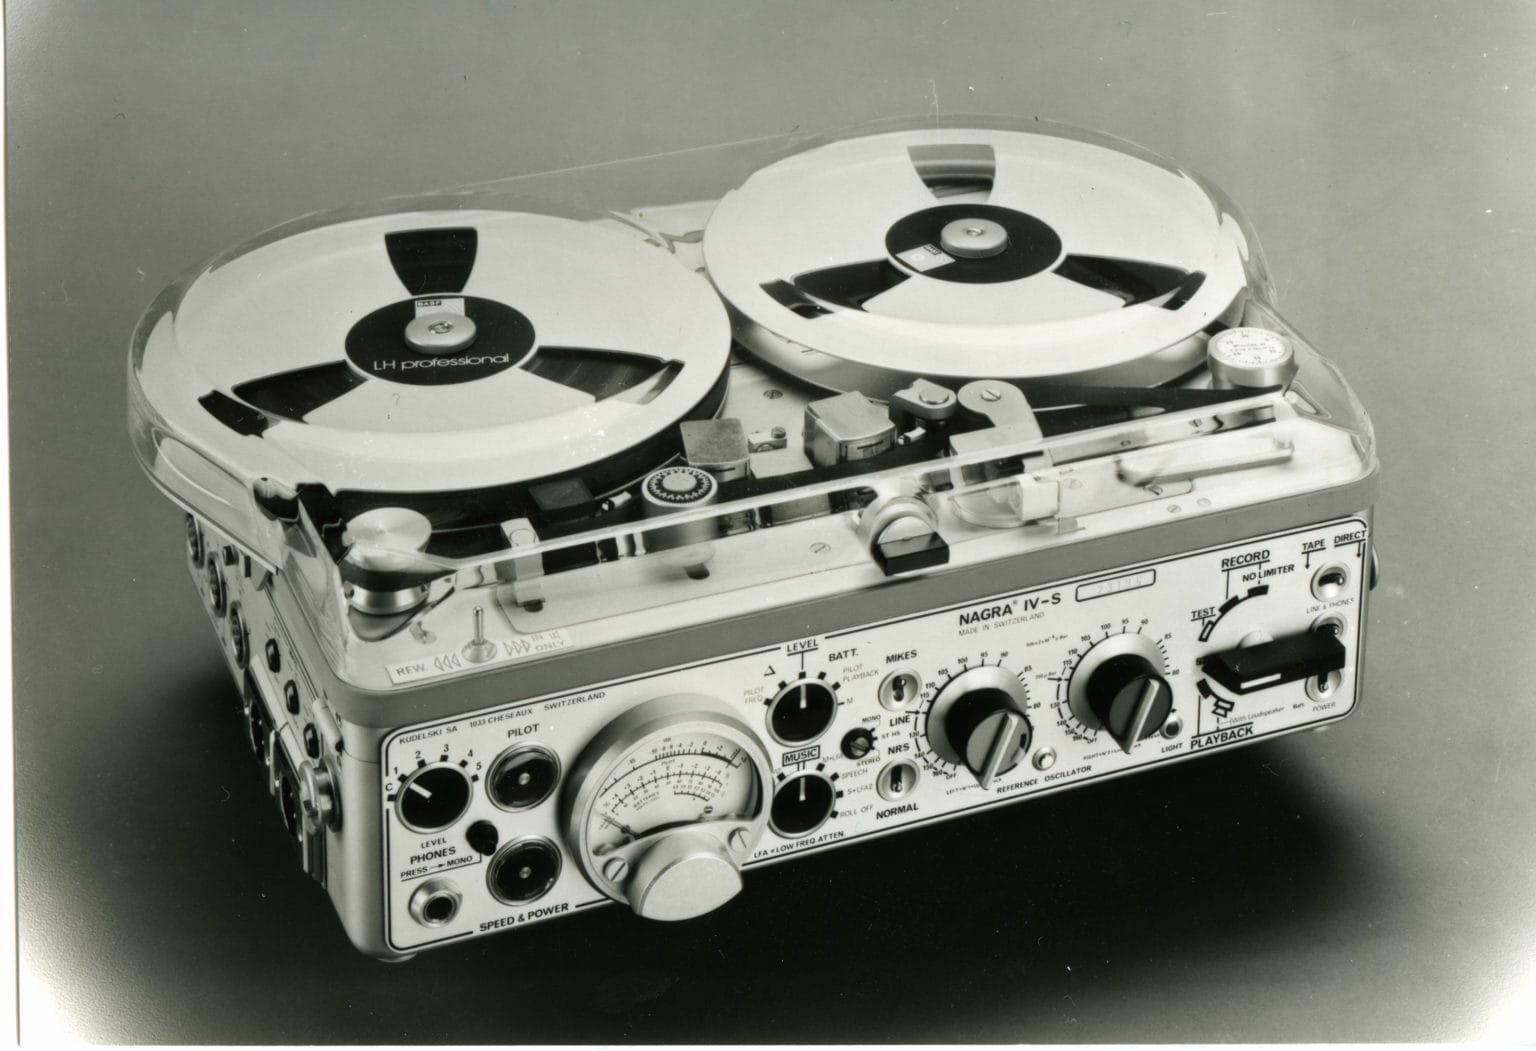 Open Reel Tape – The Ultimate Analog Source? – PS Audio